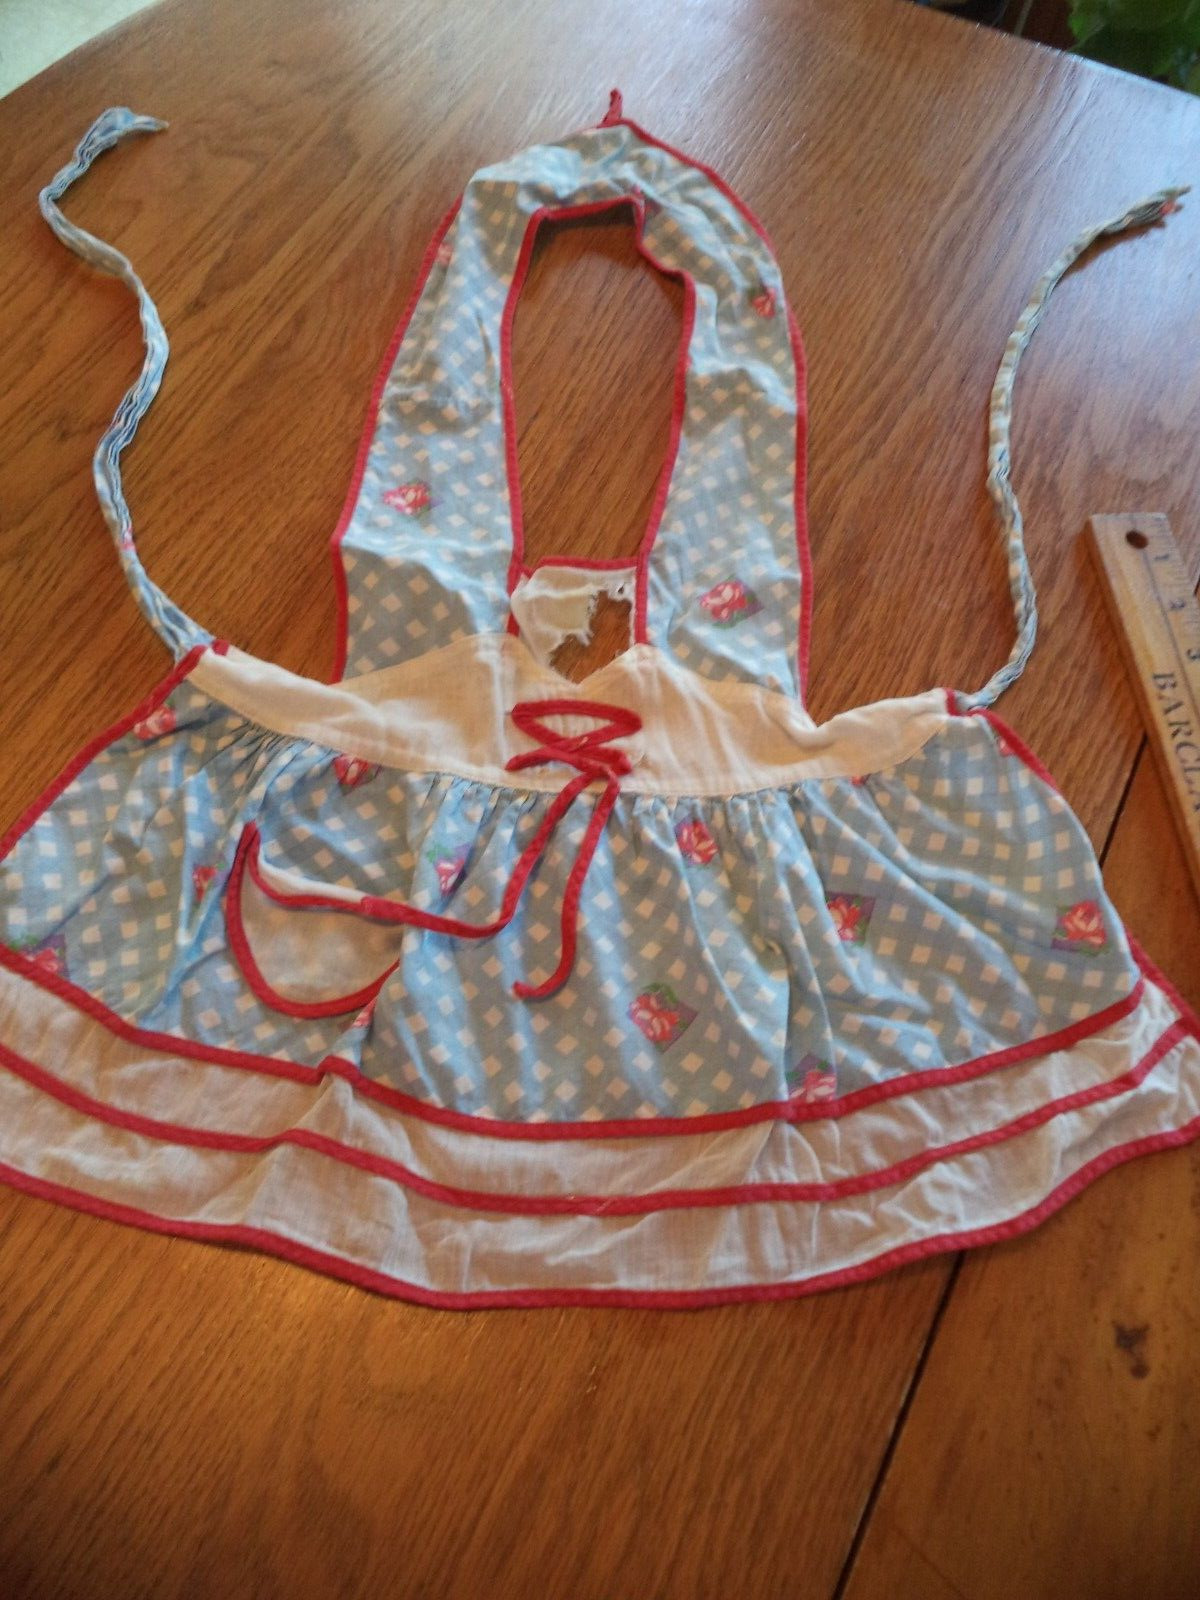 Vintage 1960s small girl\'s Apron with red trim blue and white check fabric